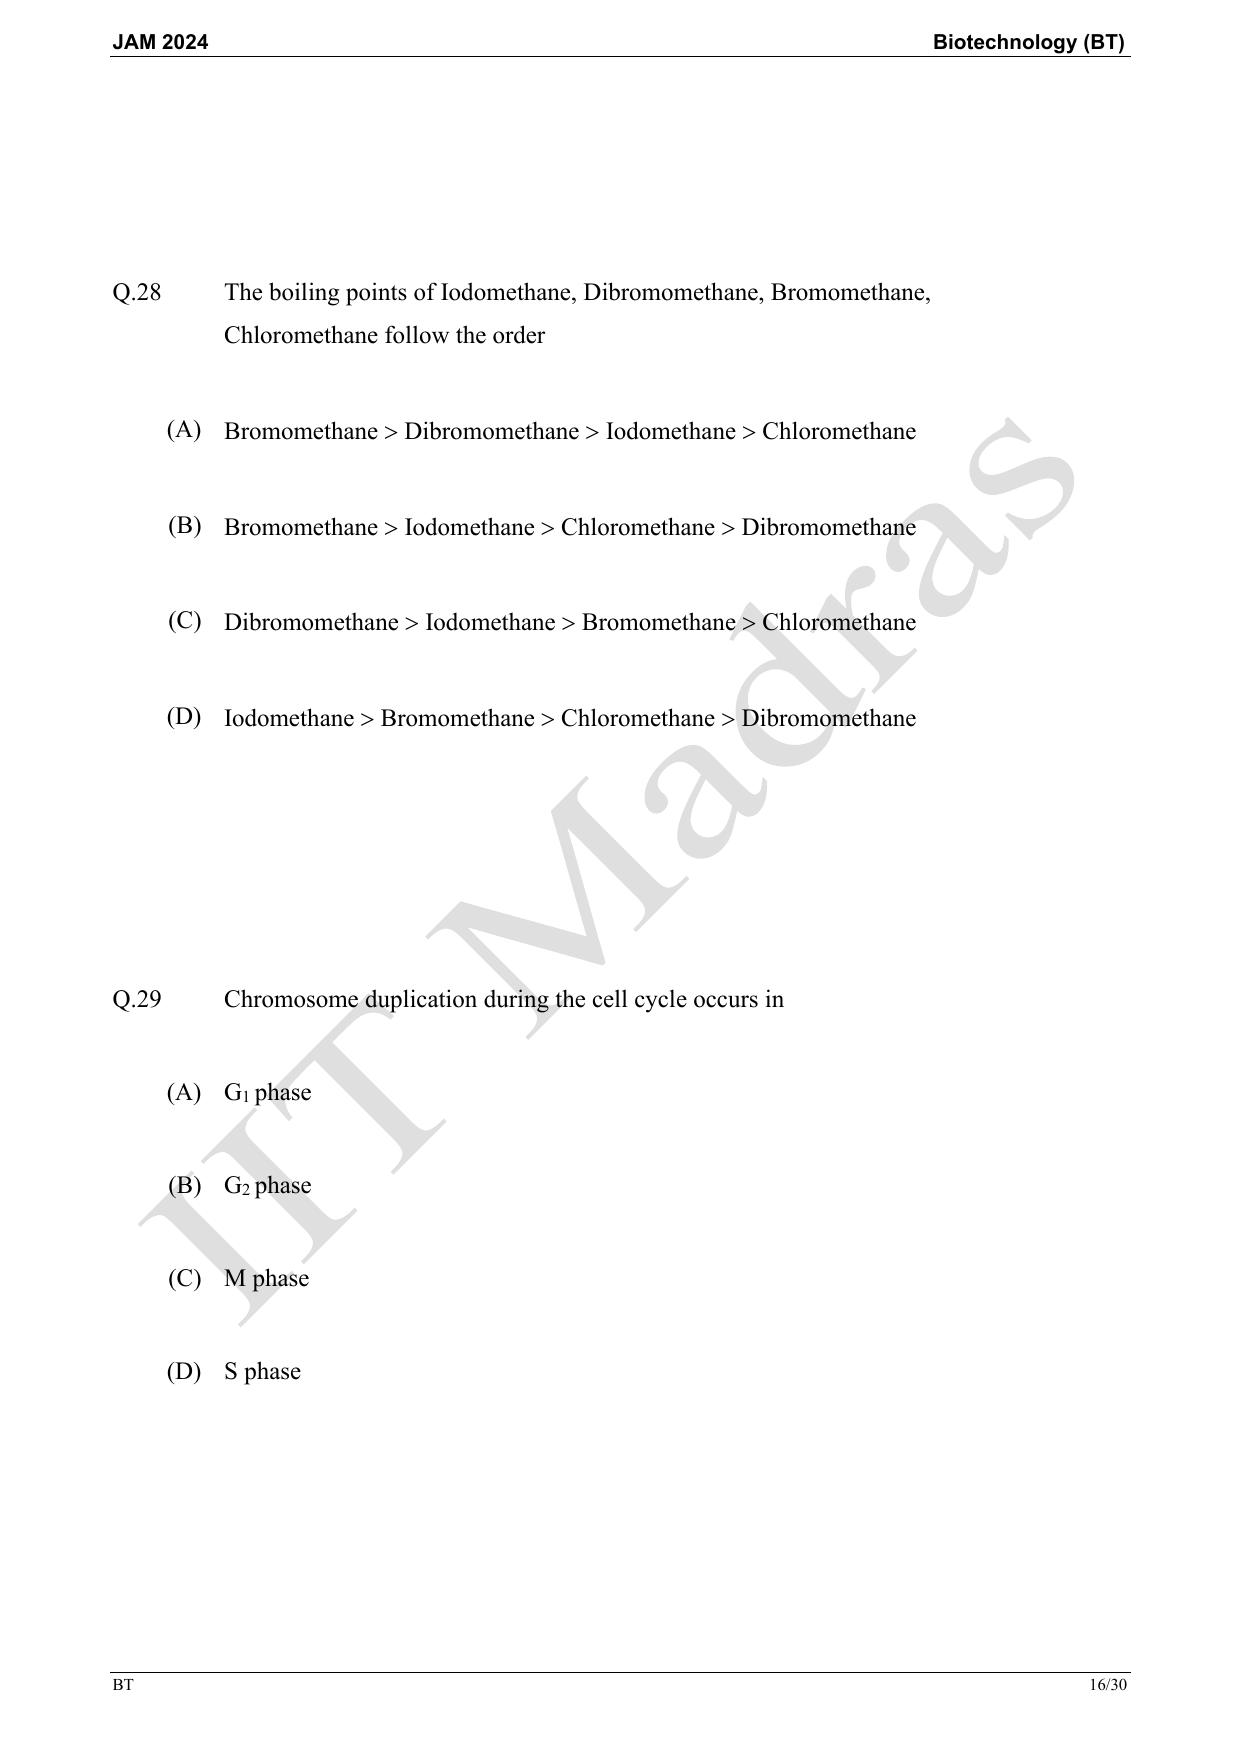 IIT JAM 2024 Biotechnology (BT) Master Question Paper - Page 16